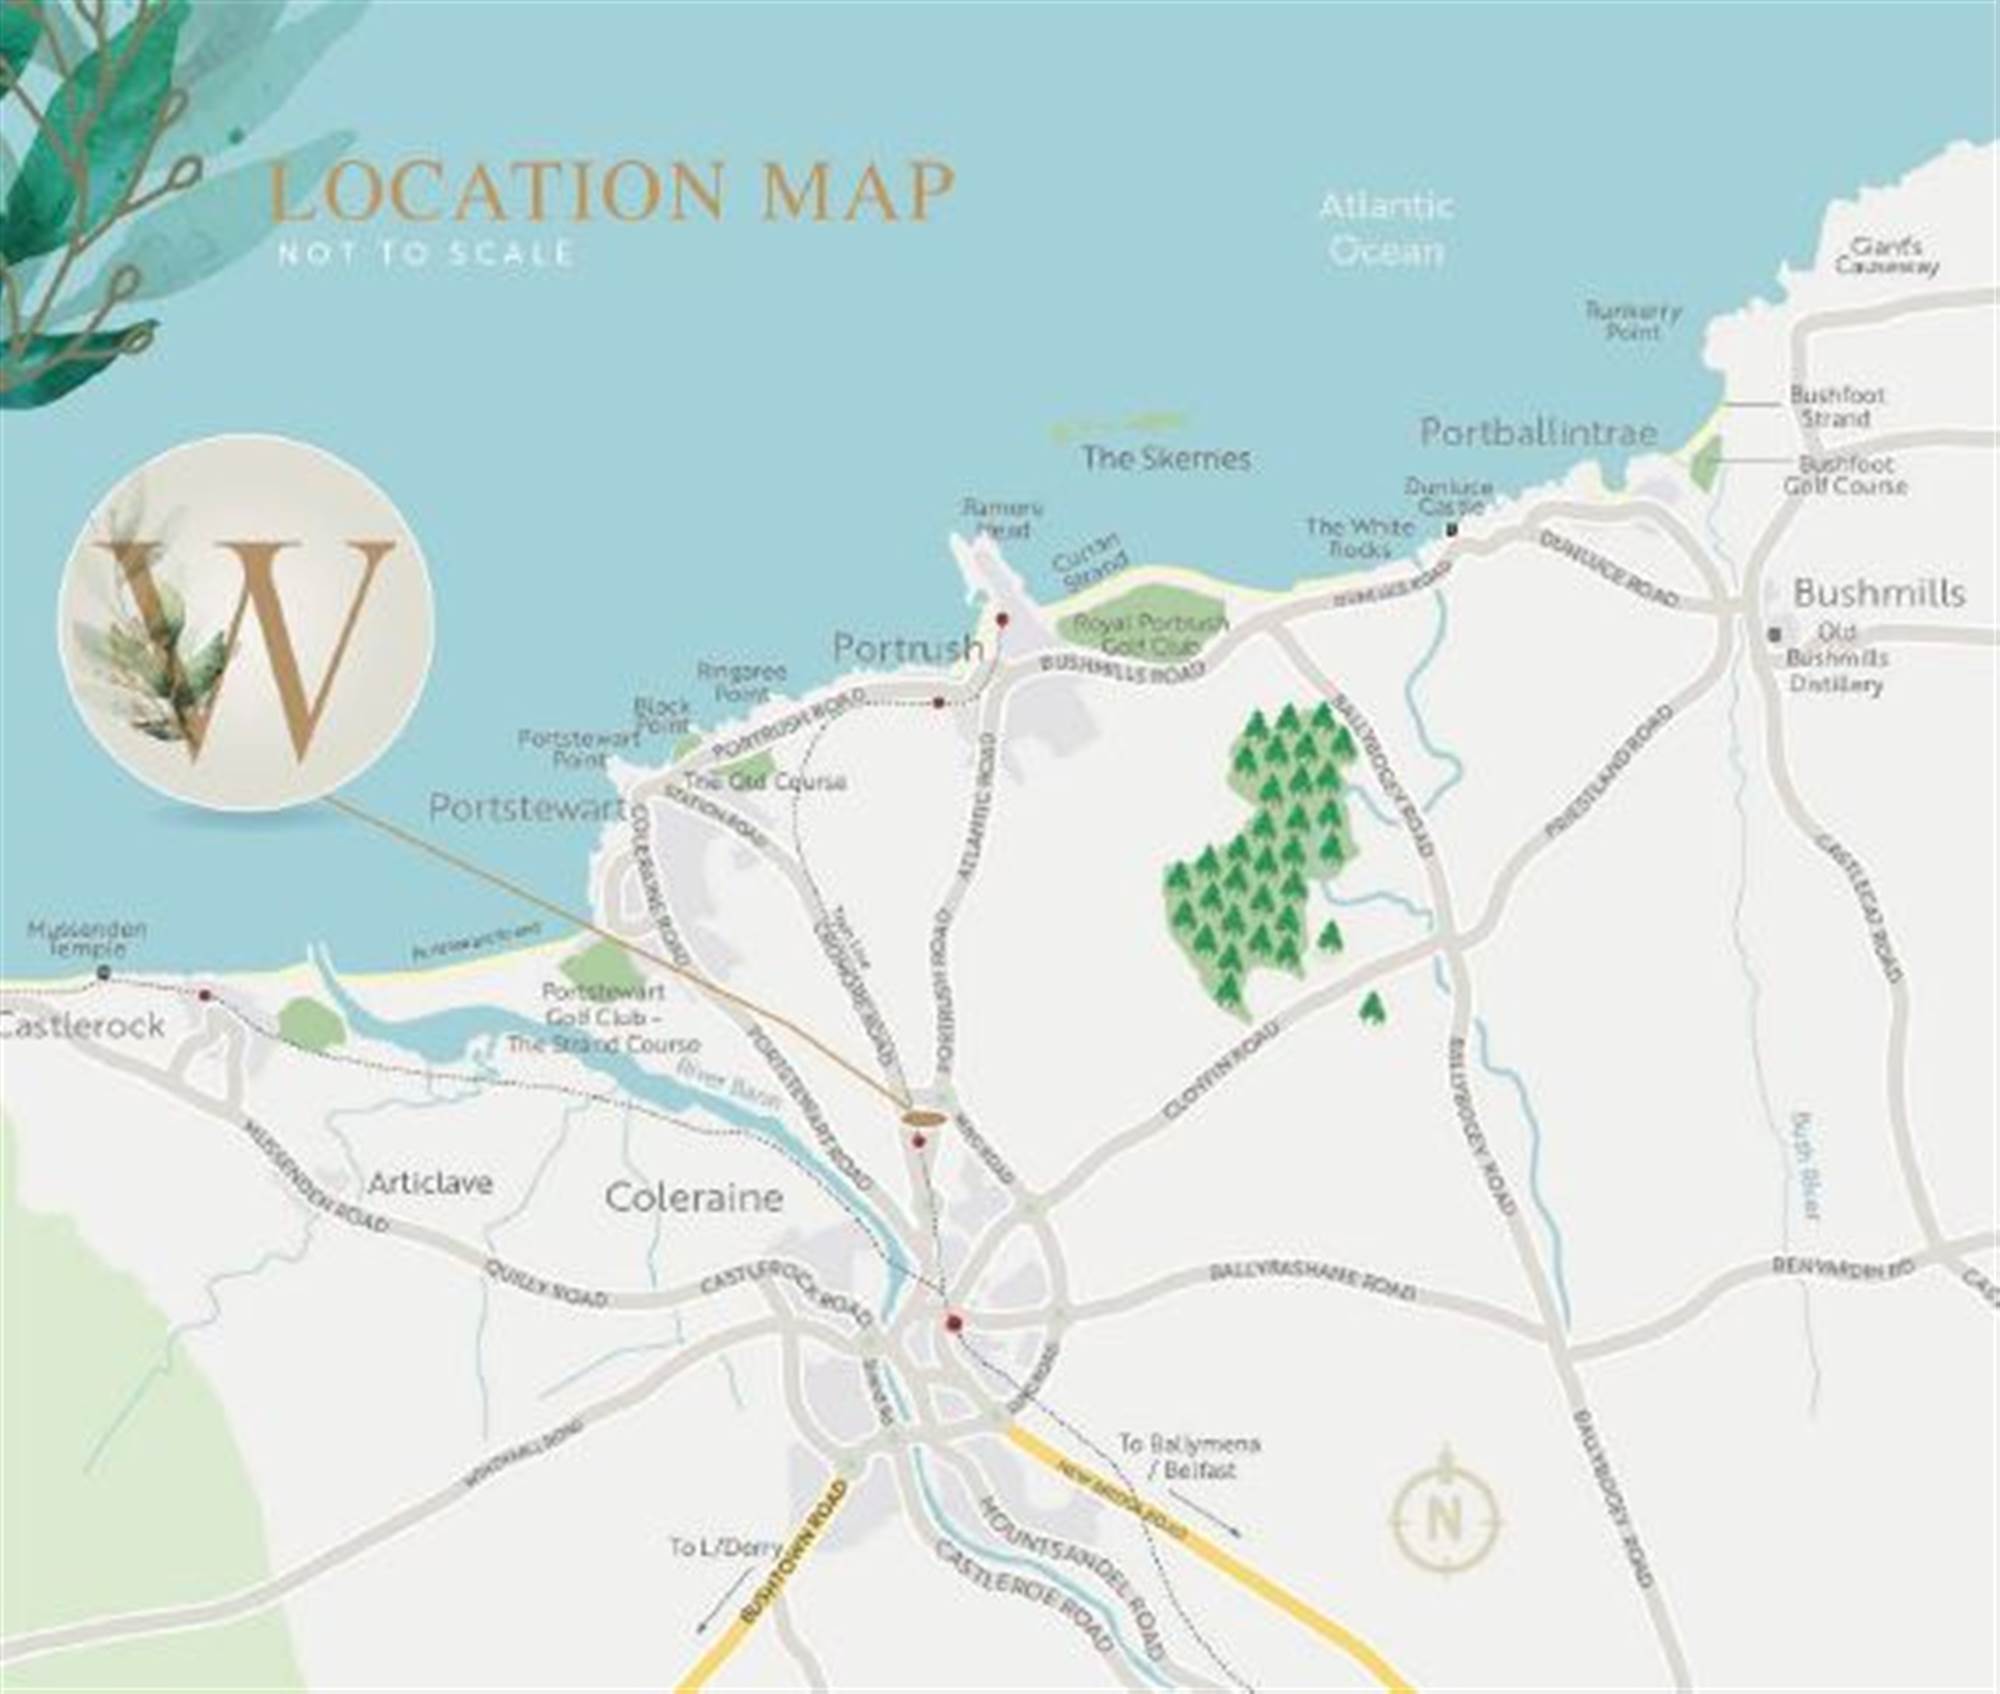 Site 25 Willowfield